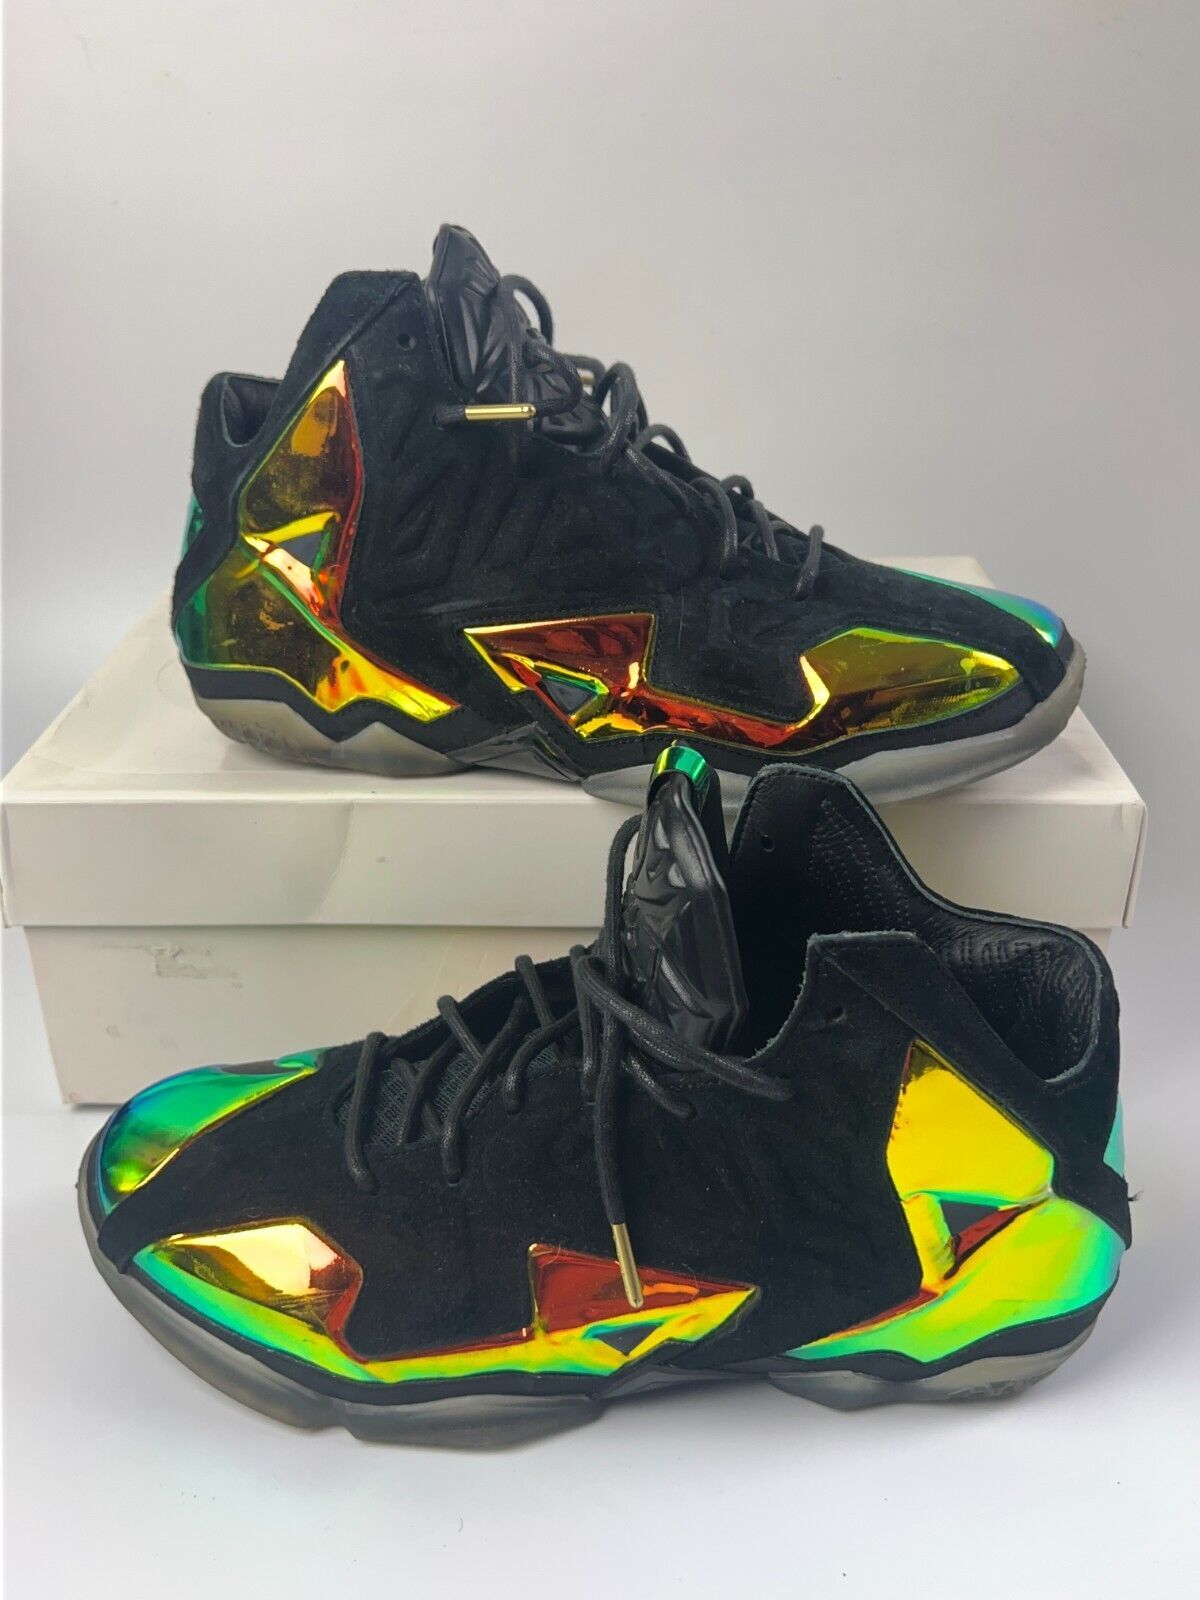 Primary image for Nike LeBron 11 EXT Kings Crown Size 9.5 Black Metallic Iridescent 677693-001